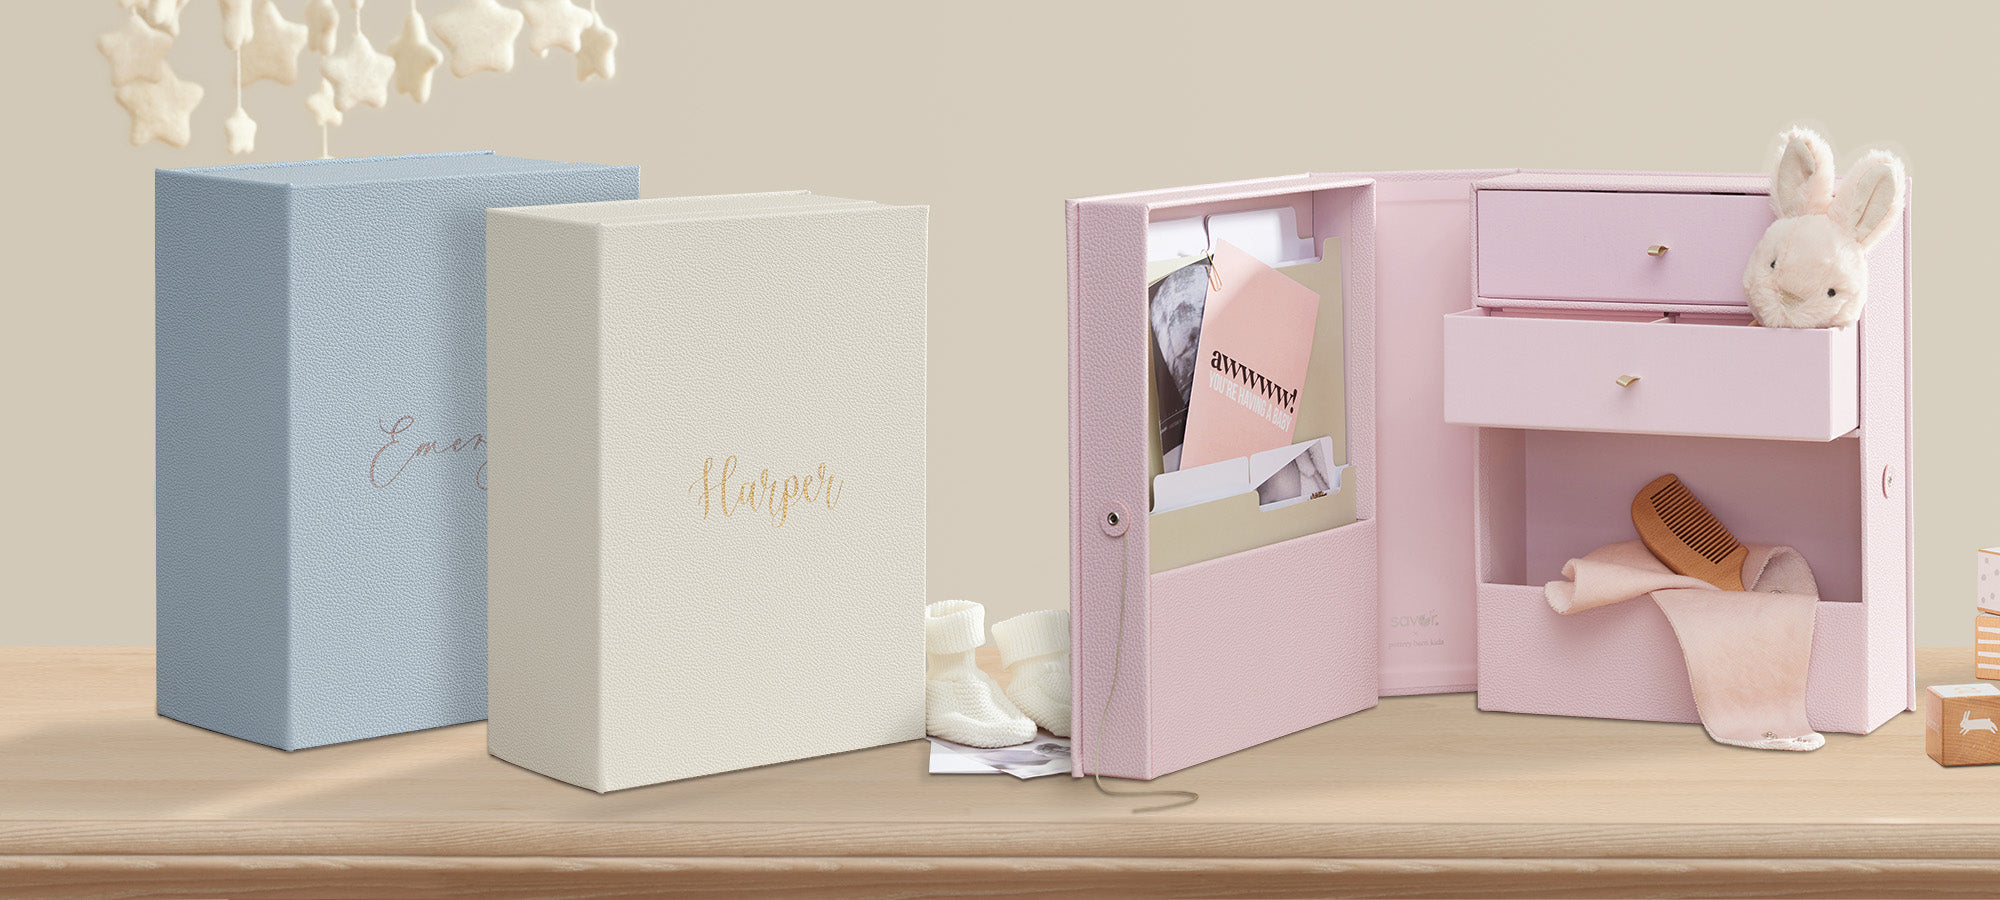 a closed ivory shagreen vault personalized with Harper in front of a sky closed shagreen vault personalized with Emersyn and an open pink shagreen vault with baby props